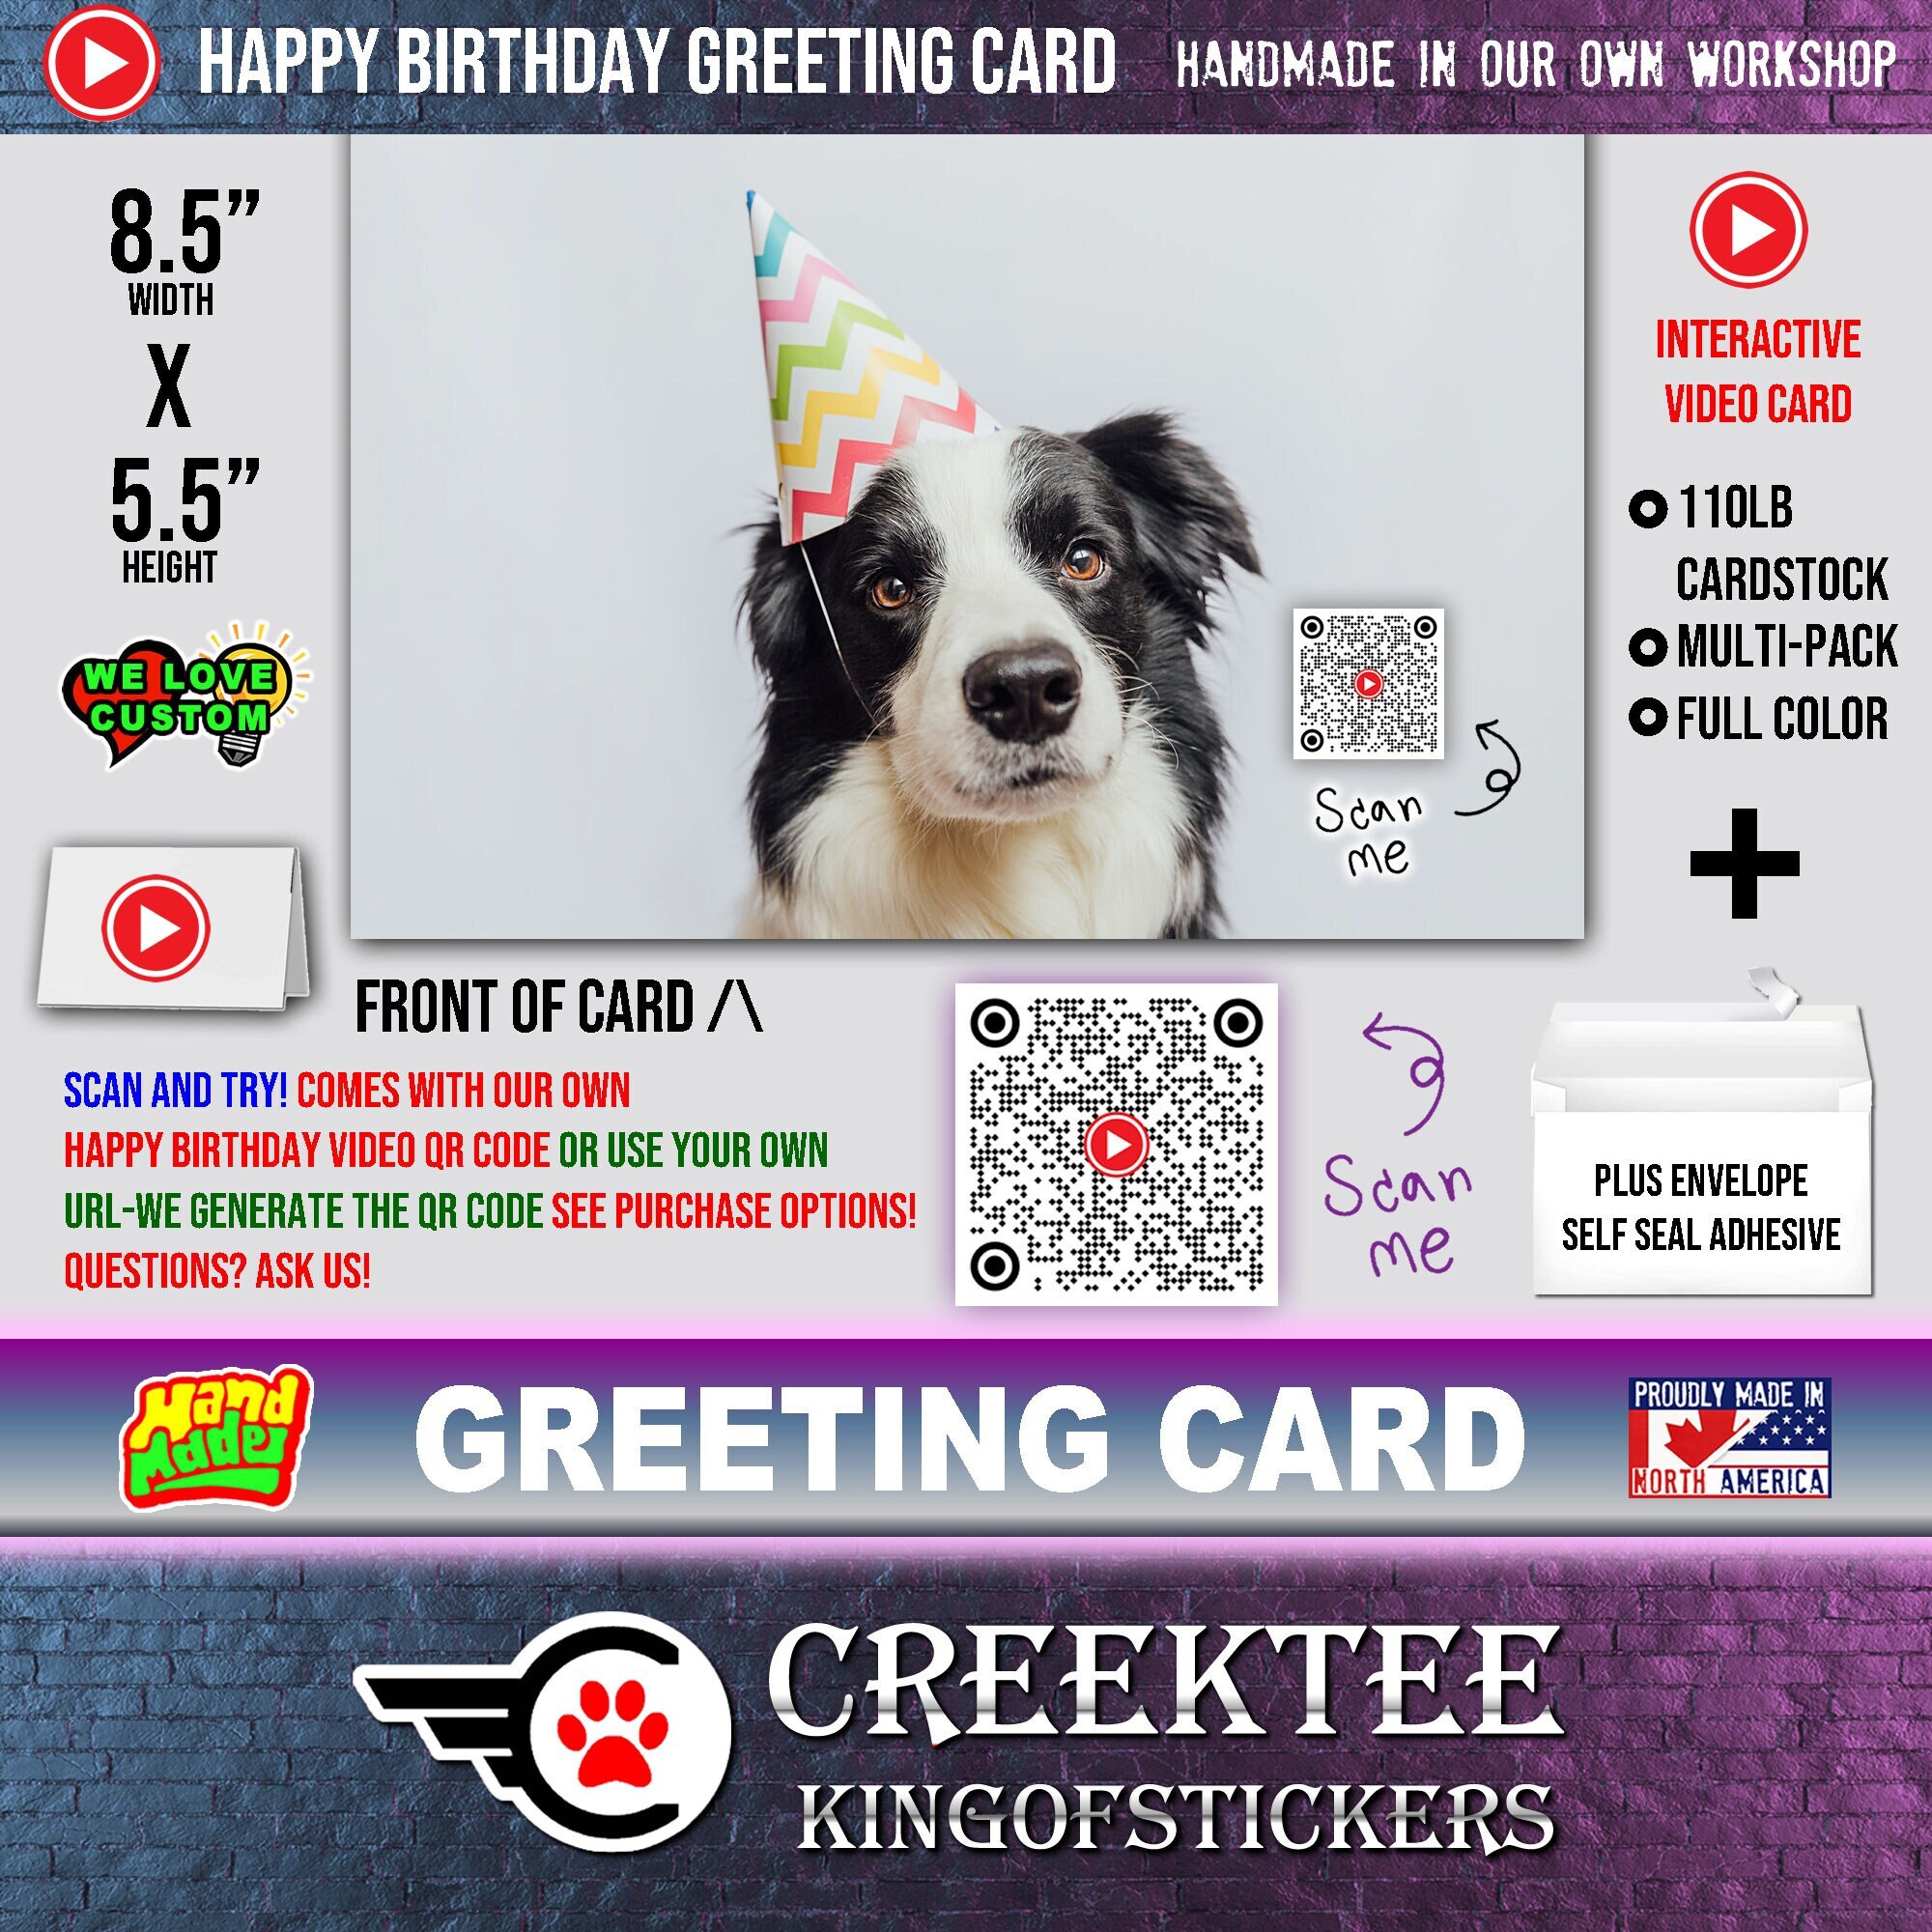 Happy Birthday Video Greeting Card 8.5 inch wide x 5.5 inch high 110lb cardstock hand made full color print. Customizable.